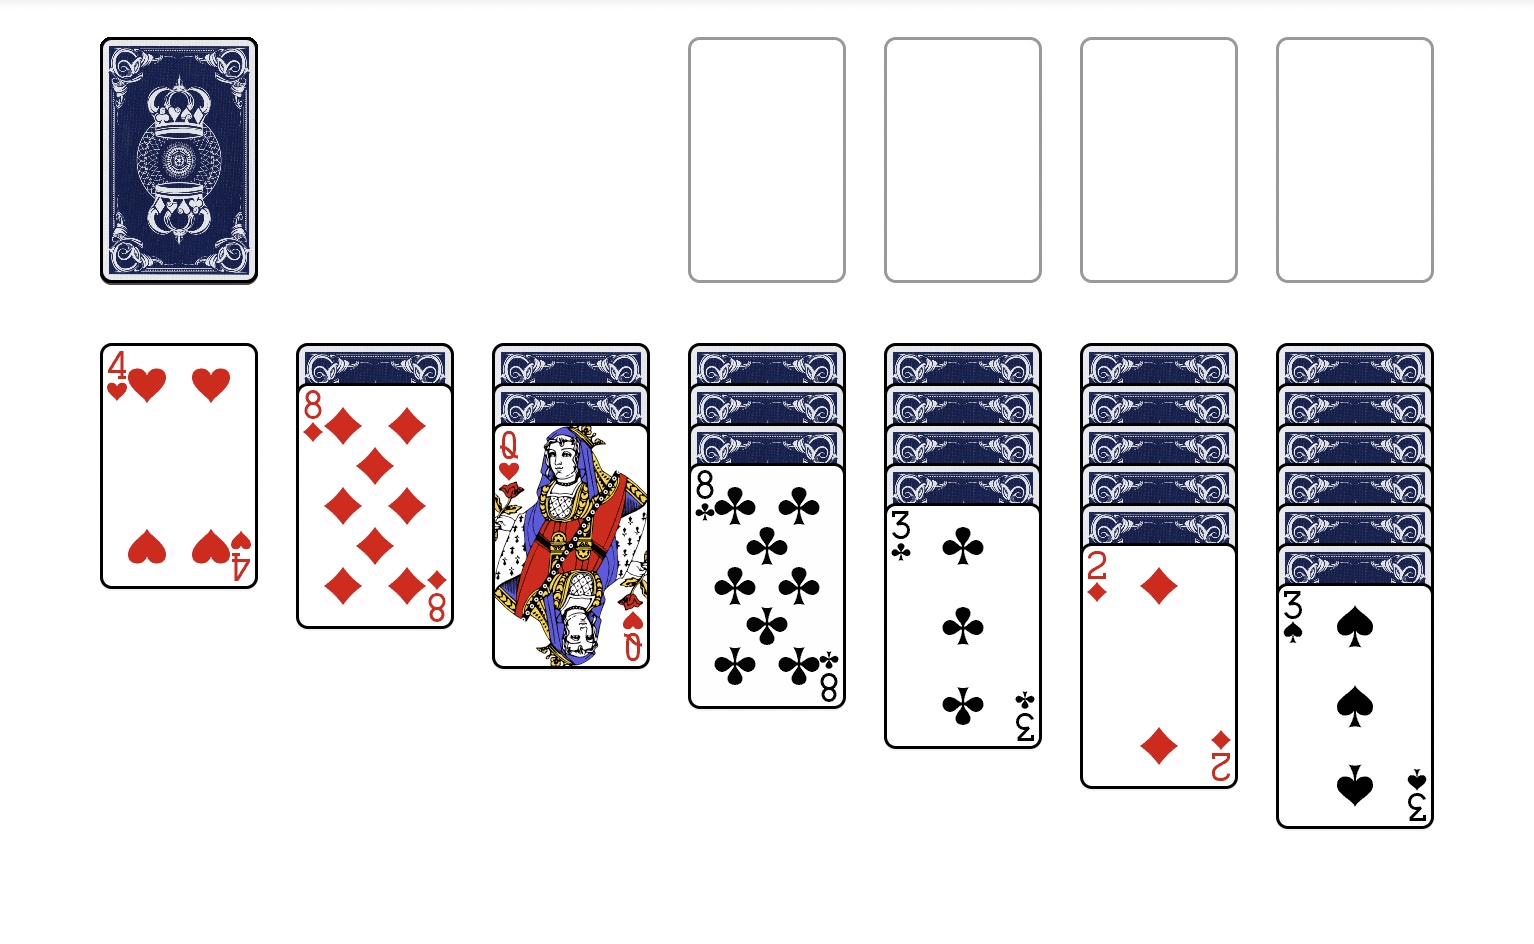 There’s a New Online Solitaire Game on the Scene, and This is How You Play it